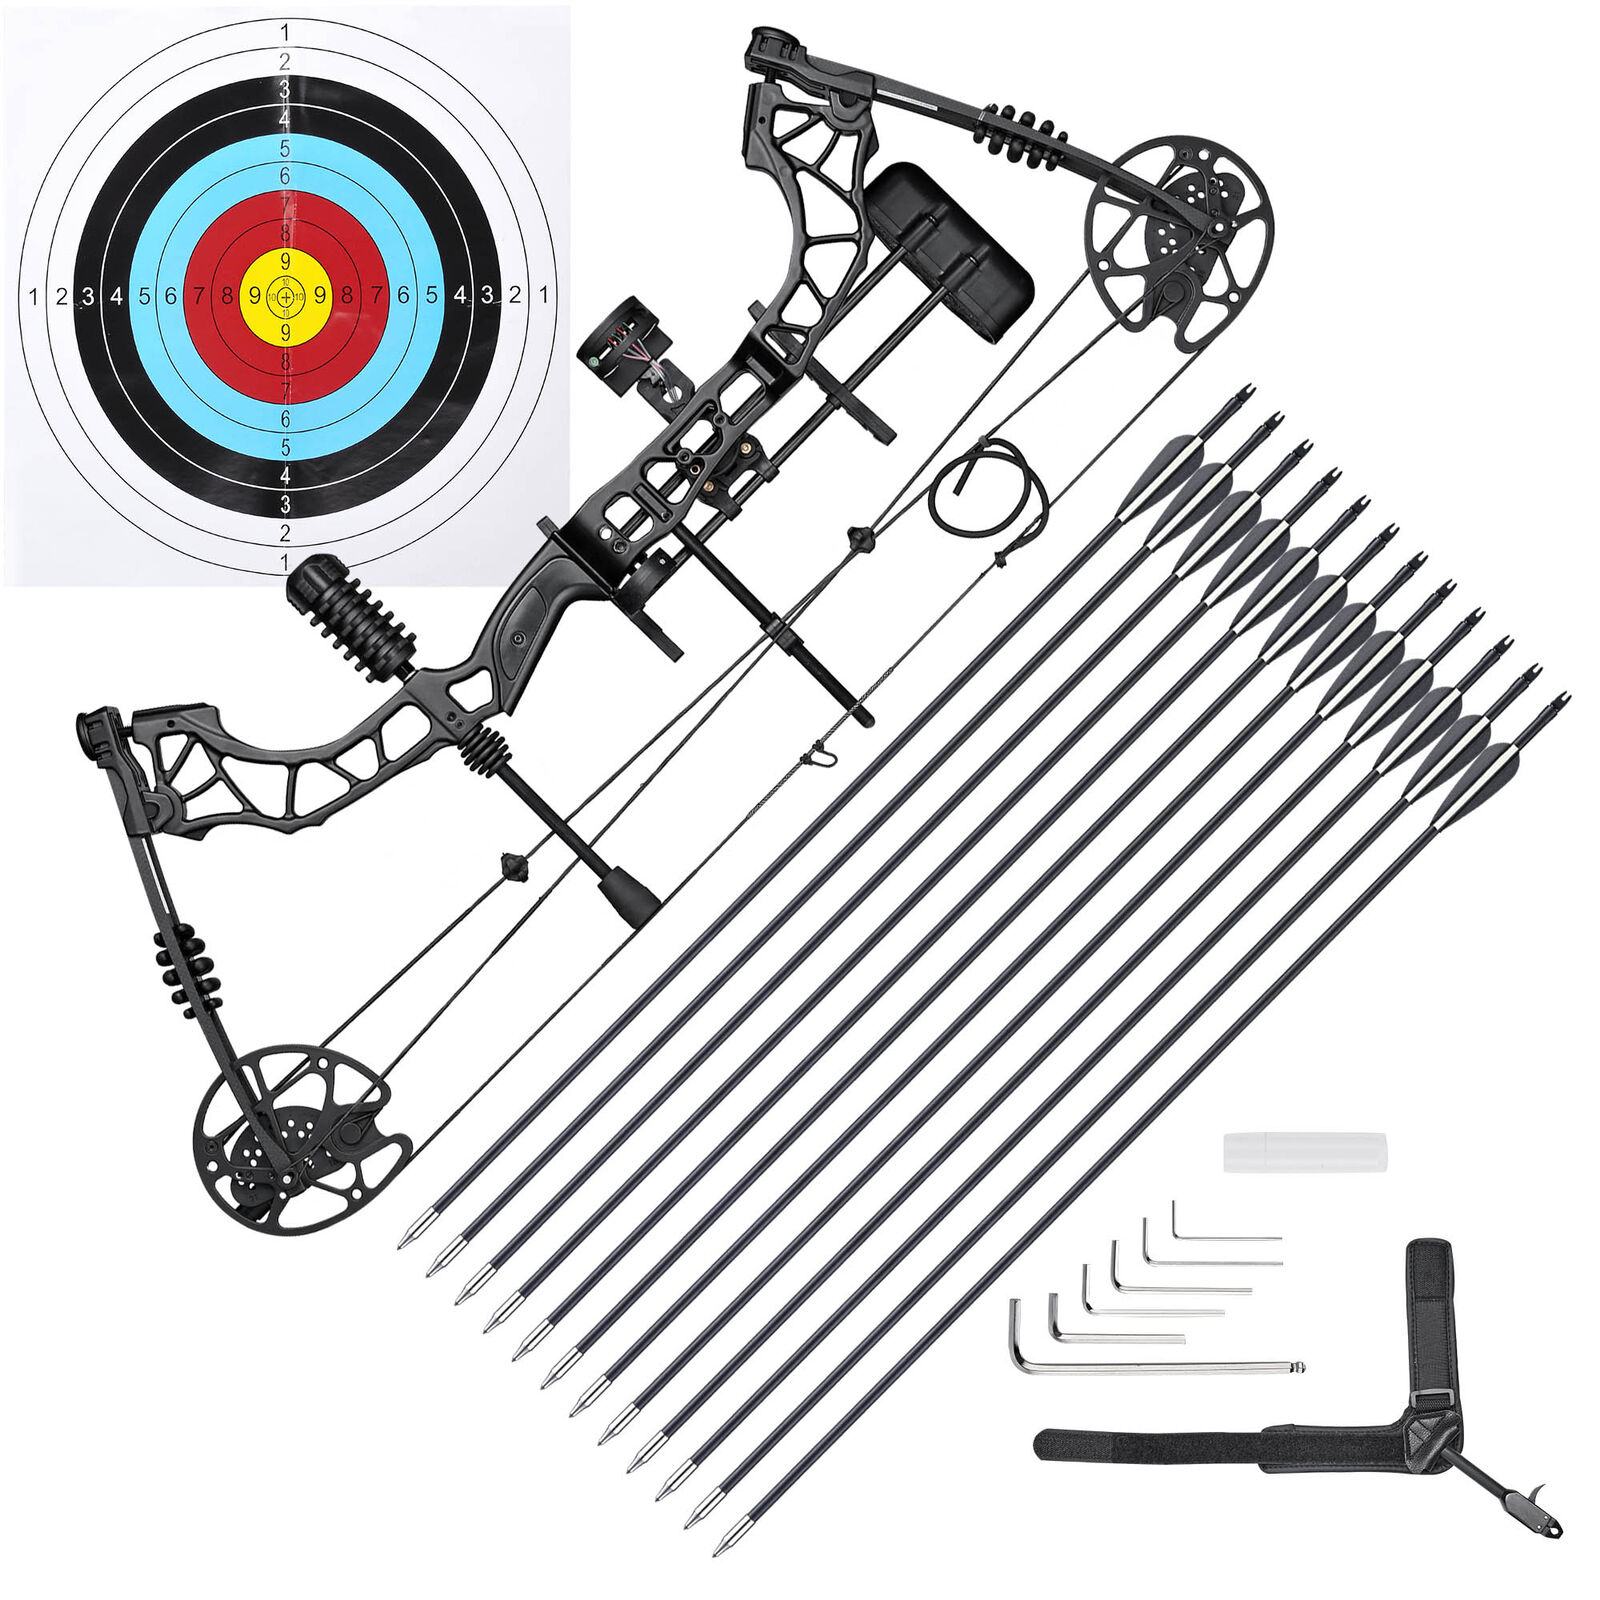 Yescom Compound Bow Kit Draw 35-70 Lbs Fit Adult Professional Hunting Bow Black